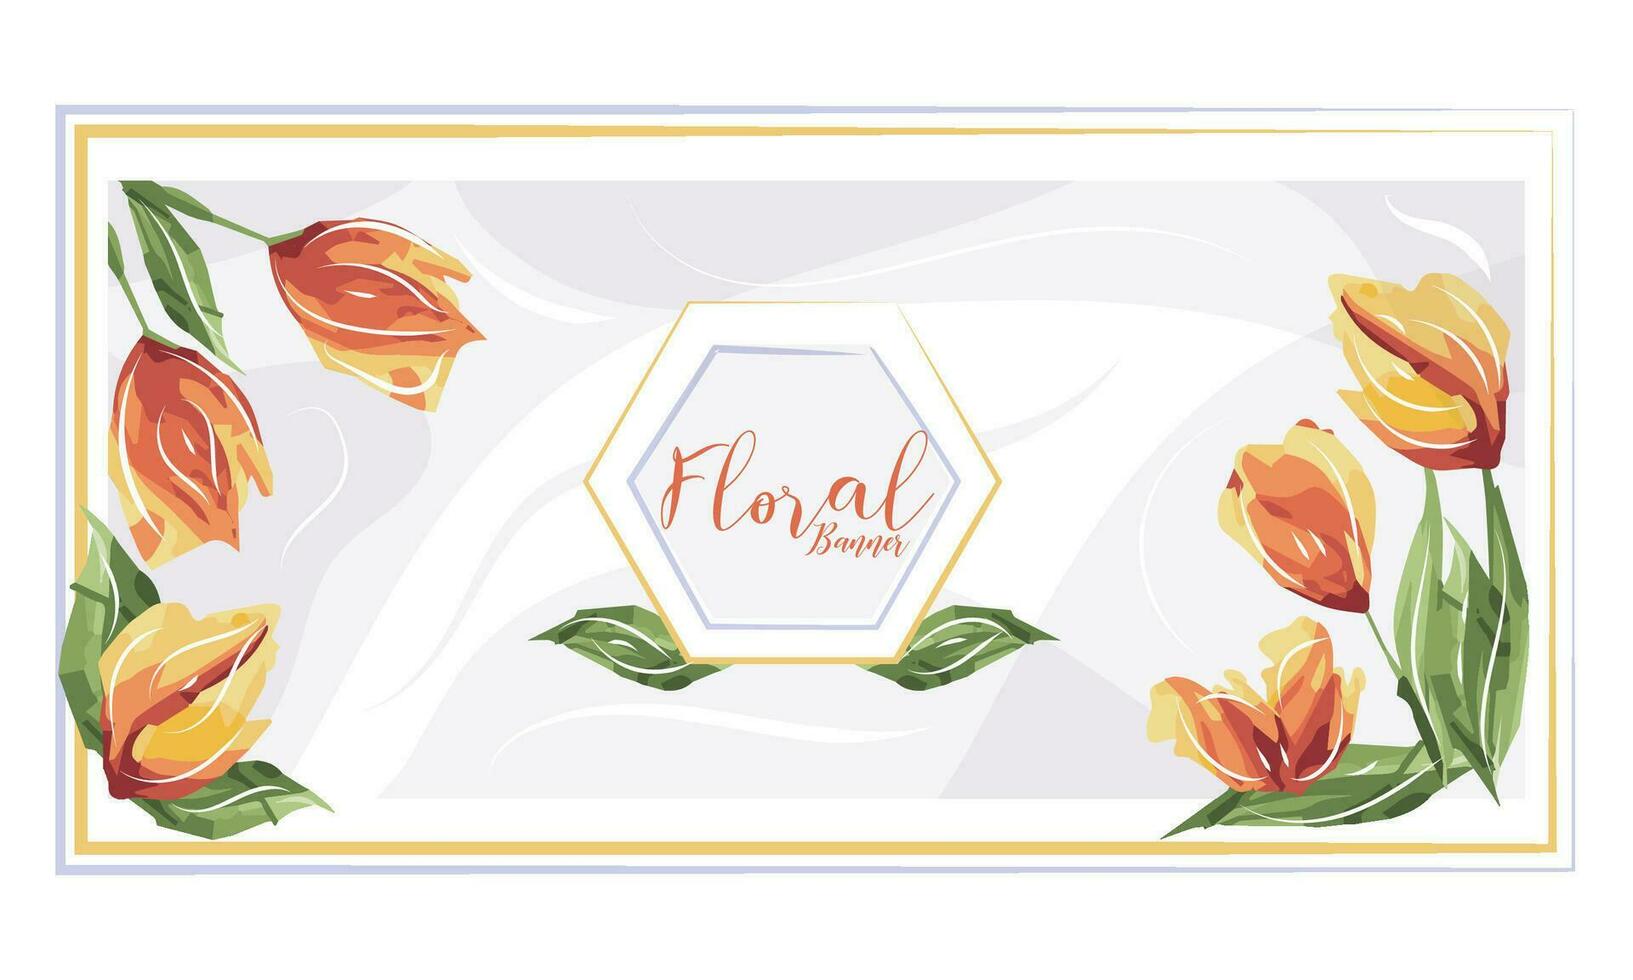 Isolated watercolored floral banner with text Vector illustration